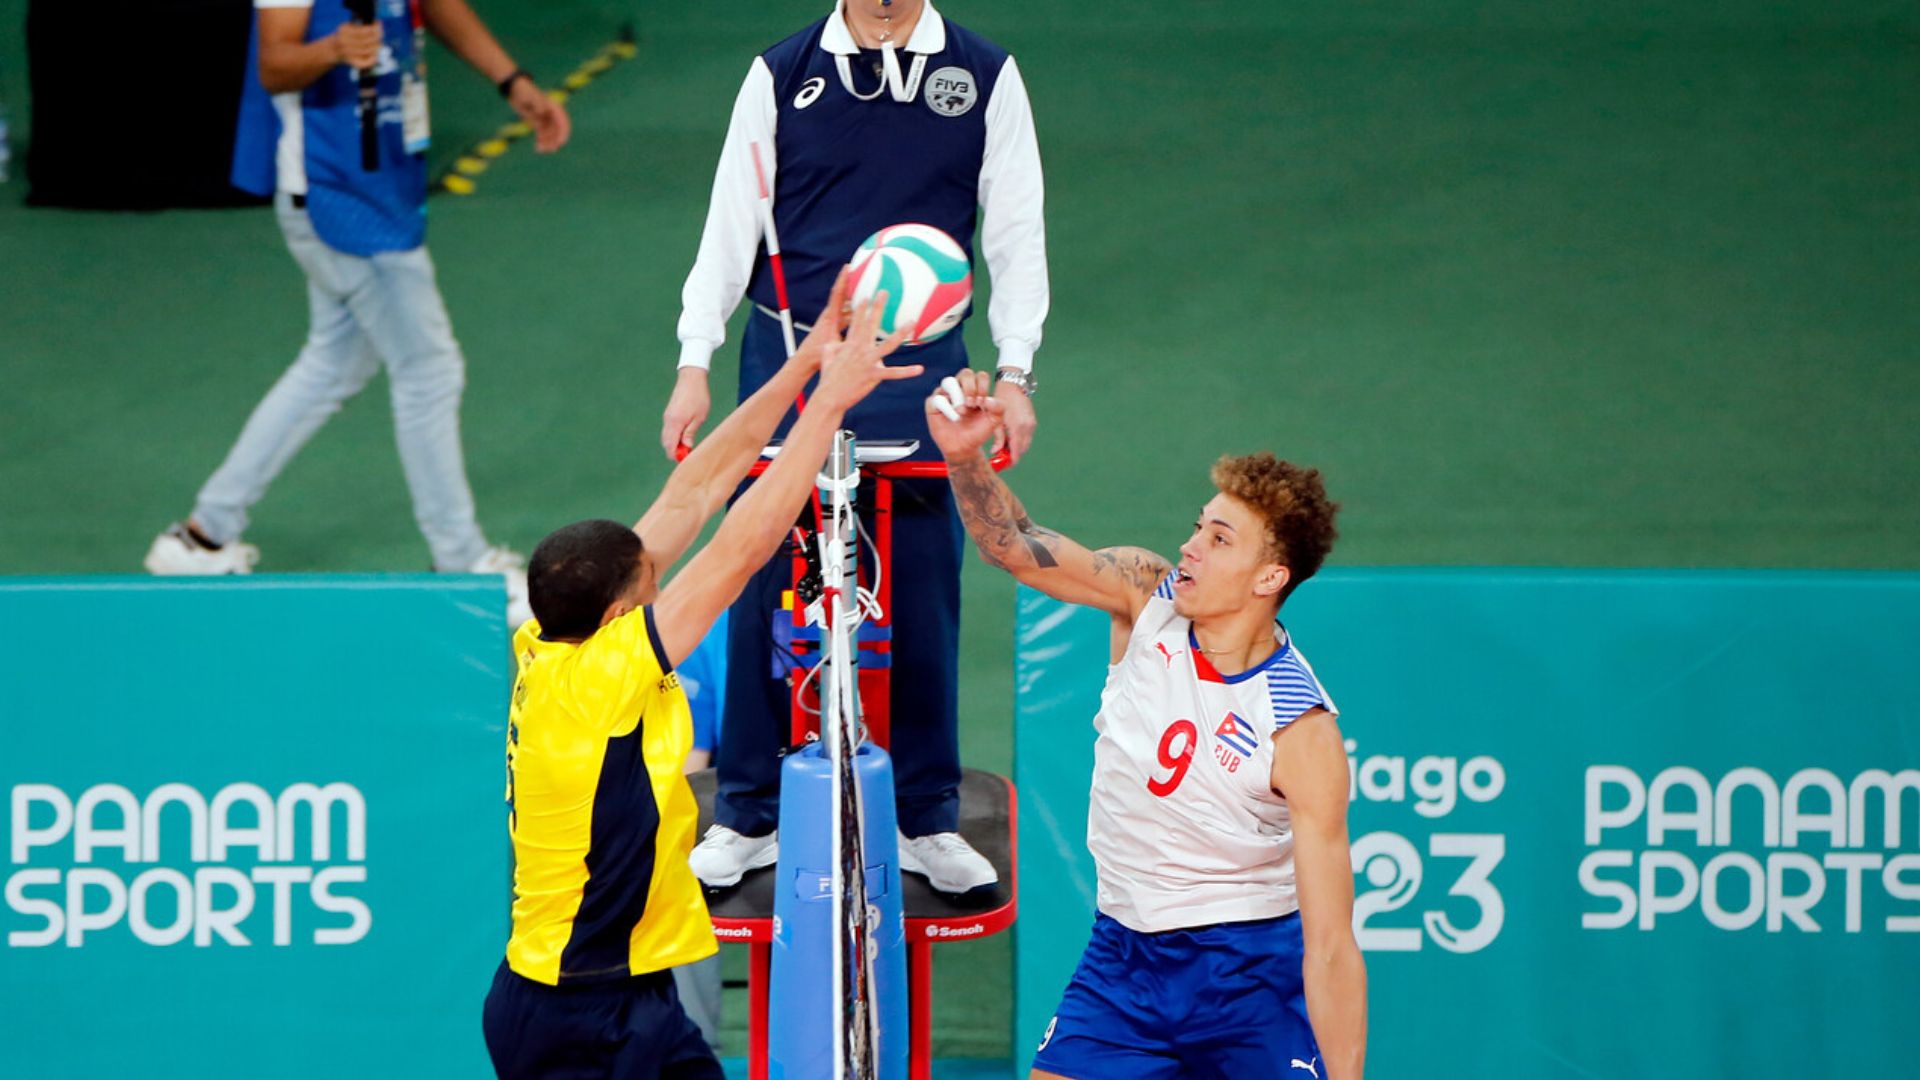 Male's Volleyball: Cuba defeats Colombia and remains undefeated